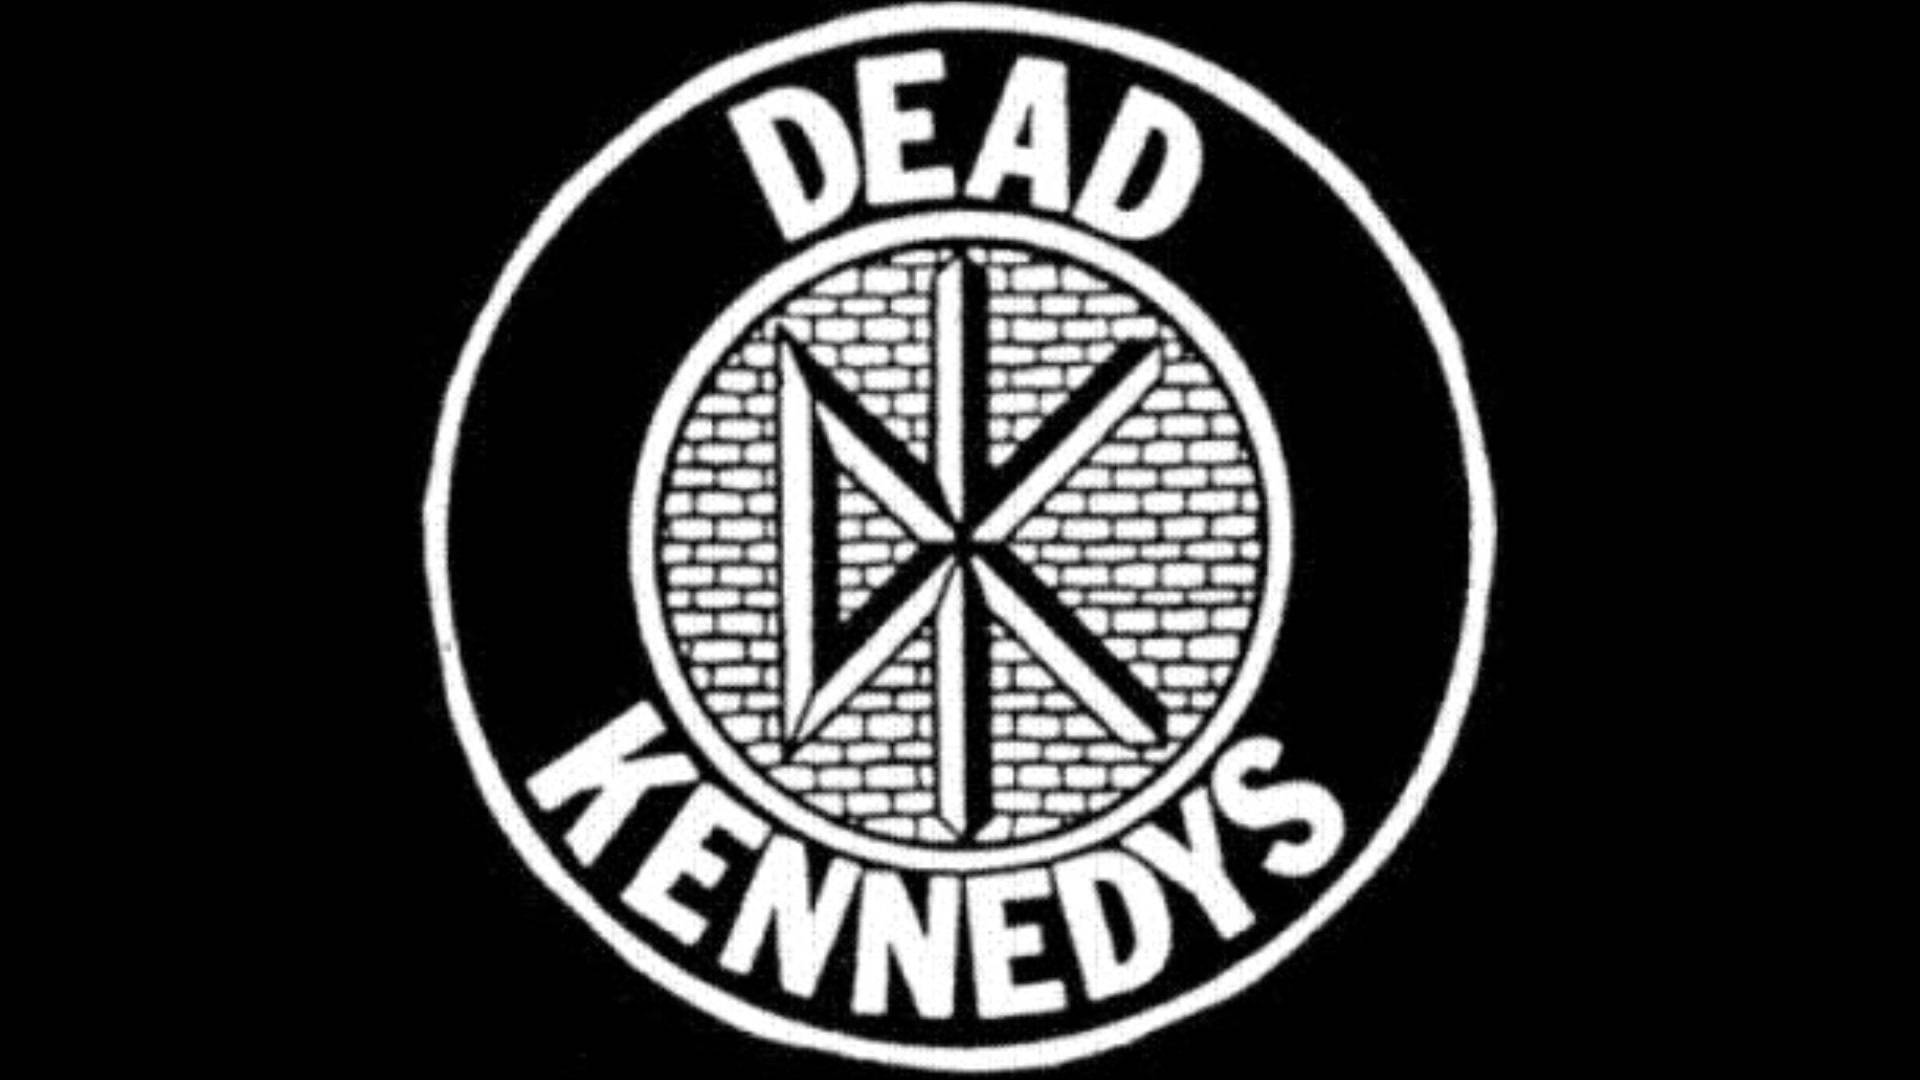 Dead kennedys mutations of today with lyrics - YouTube